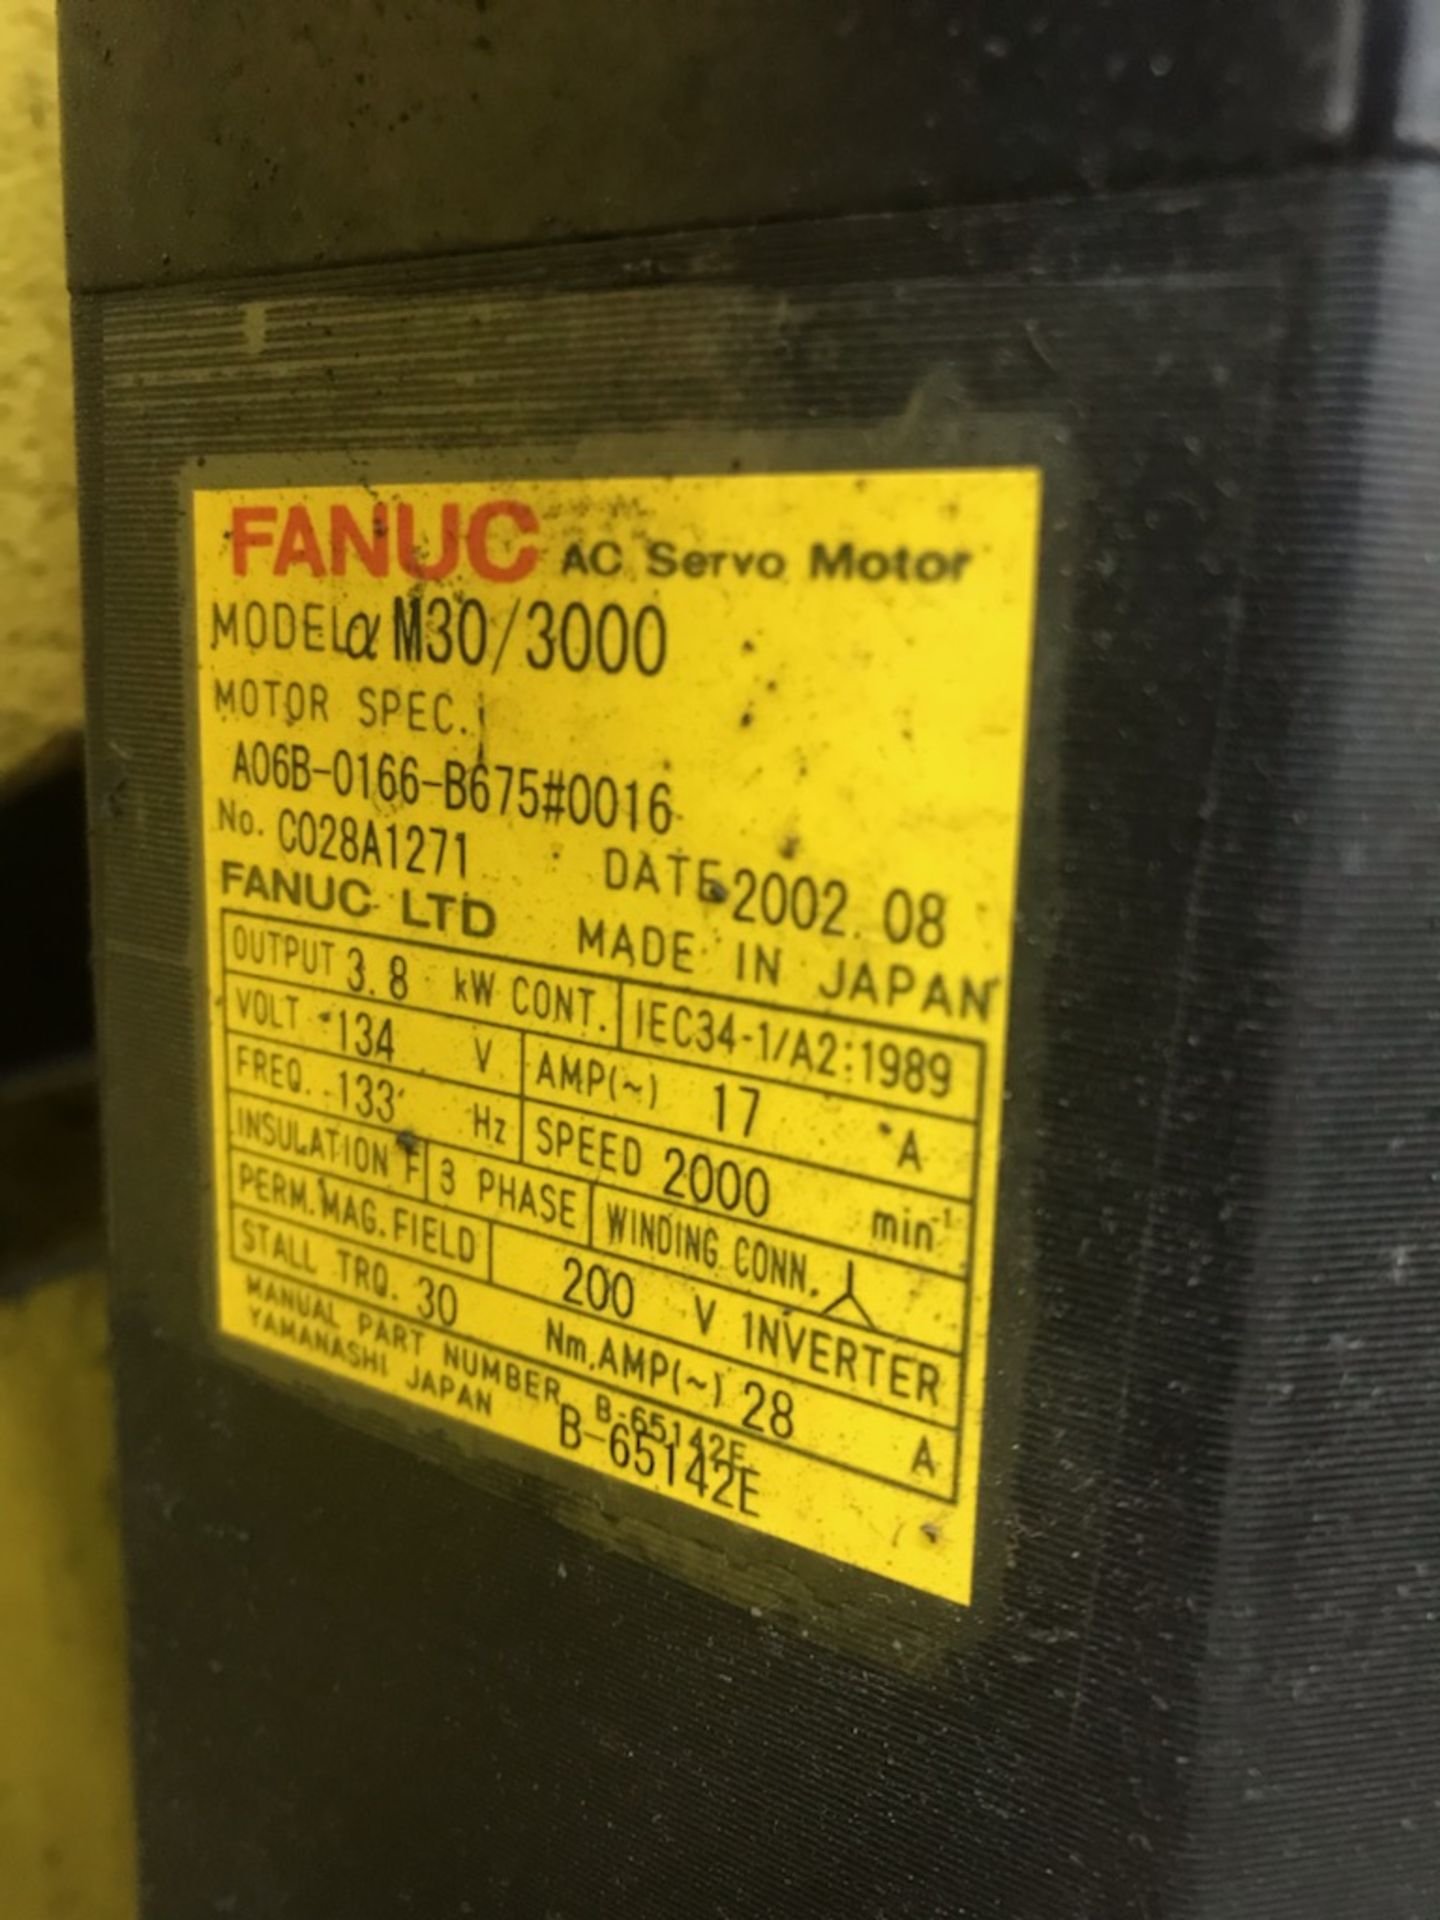 FANUC S-430IW LOADING ROBOT W/ SYSTEM RJ3 ROBOT CONTROLLER, CABLES AND TEACH PENDANT (LOCATED IN - Image 9 of 10